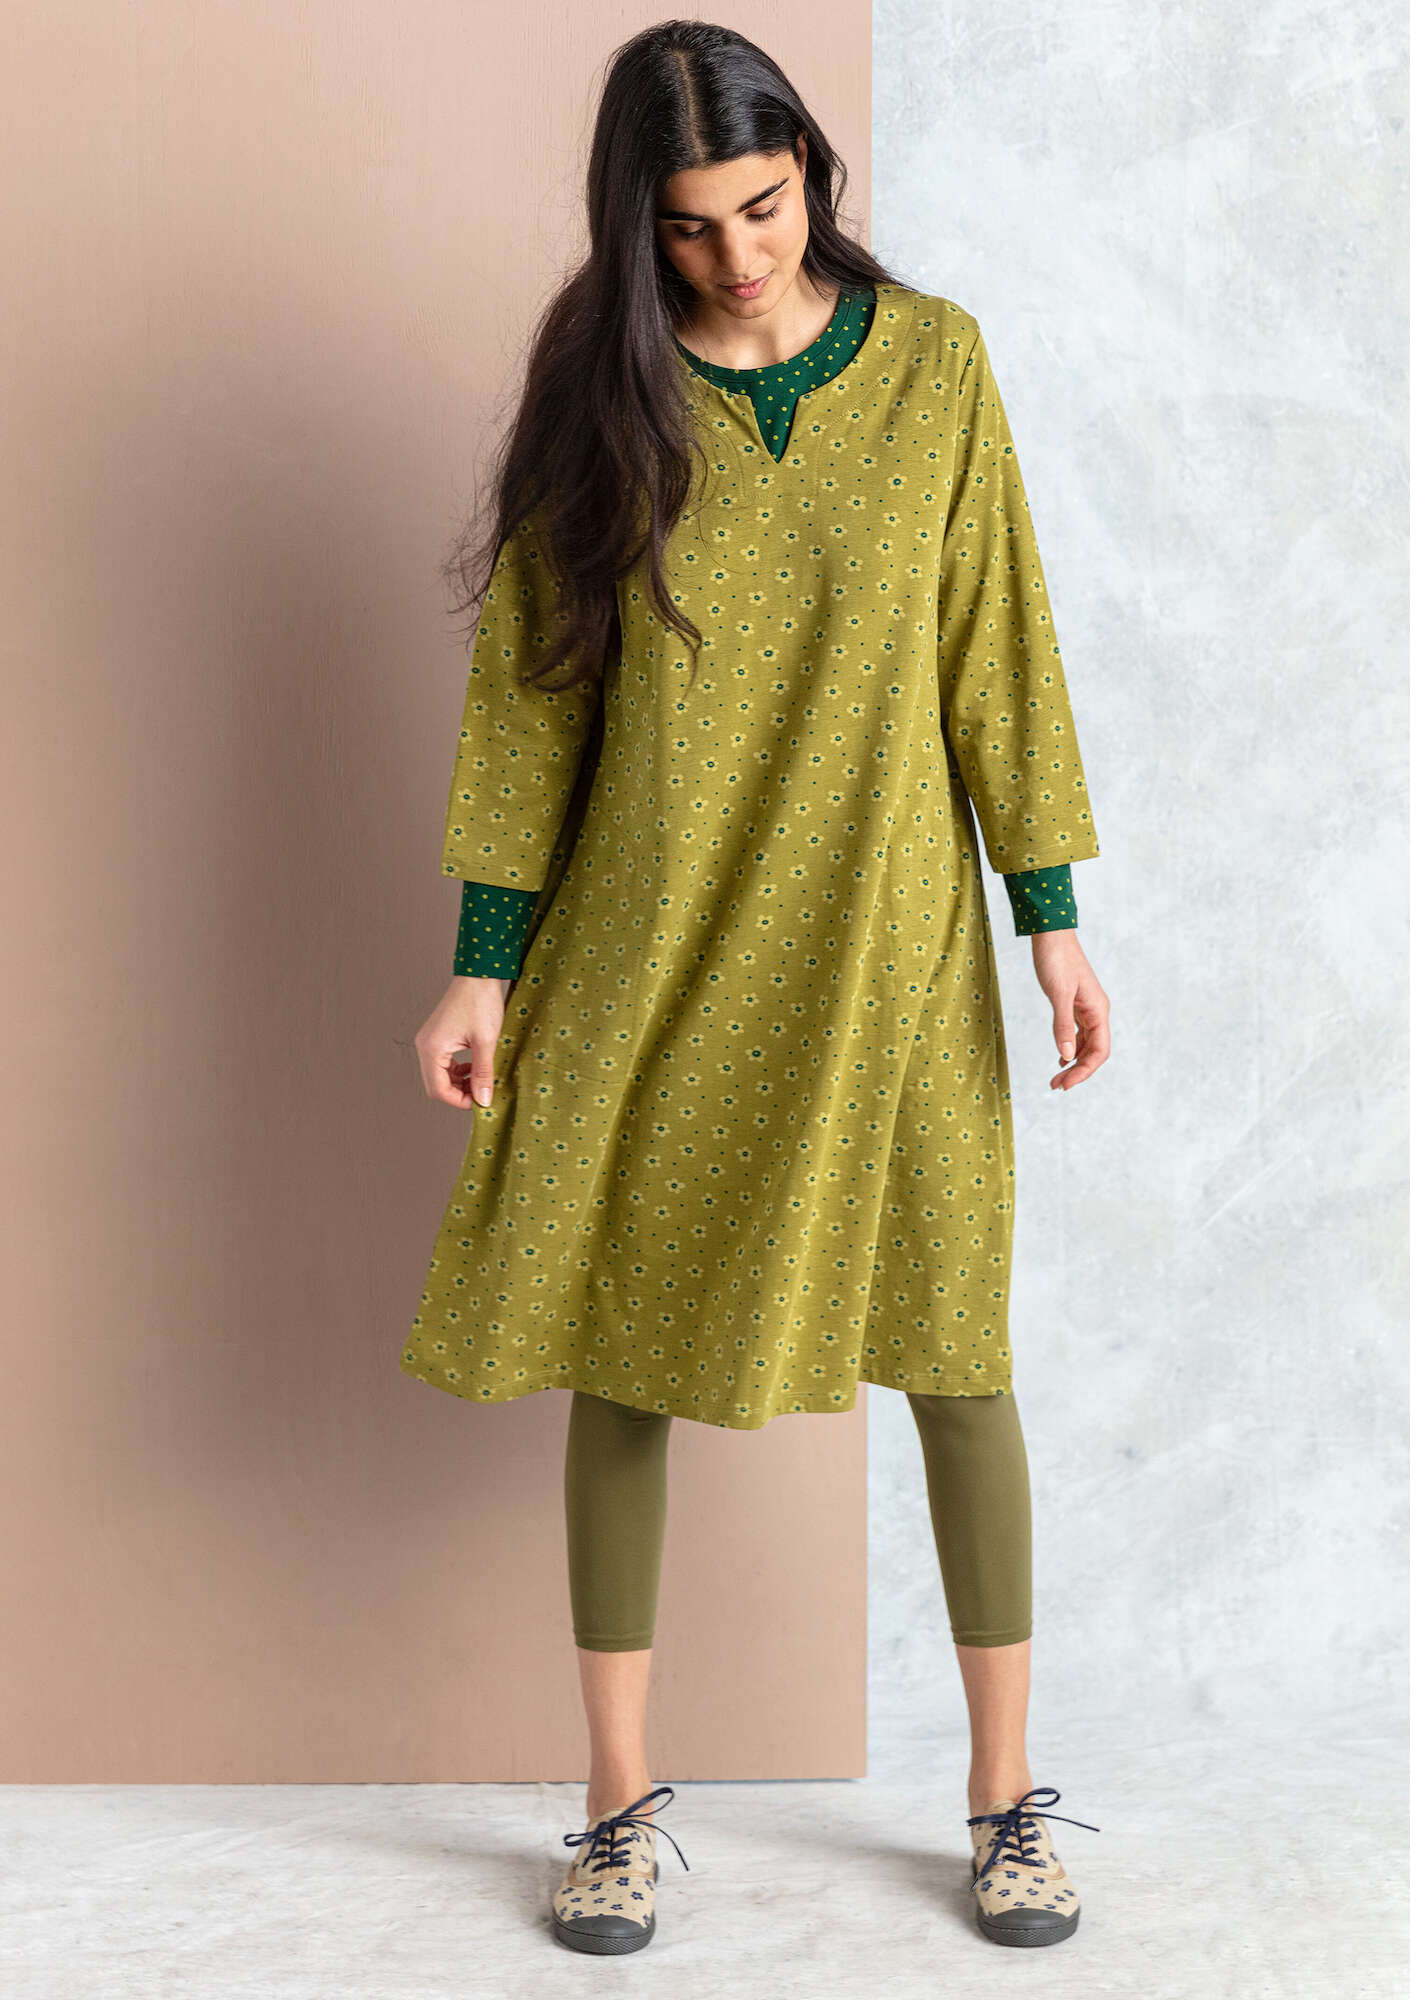 “Belle” jersey dress in organic cotton/spandex avocado/patterned thumbnail